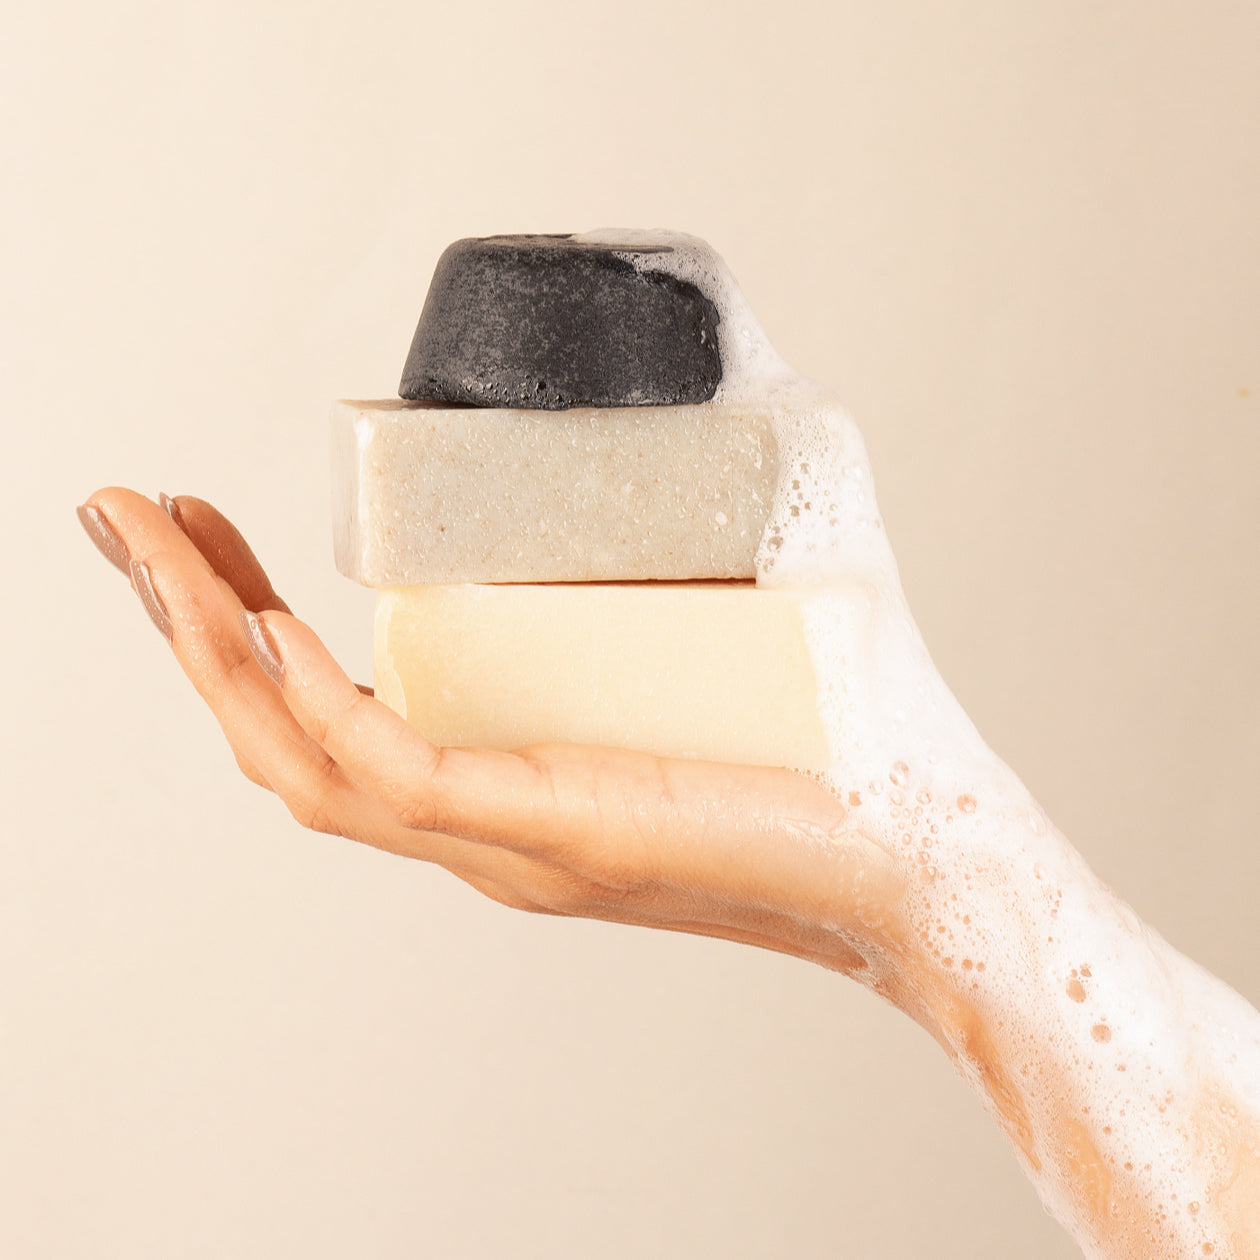 soaps and exfoliator being held in the air